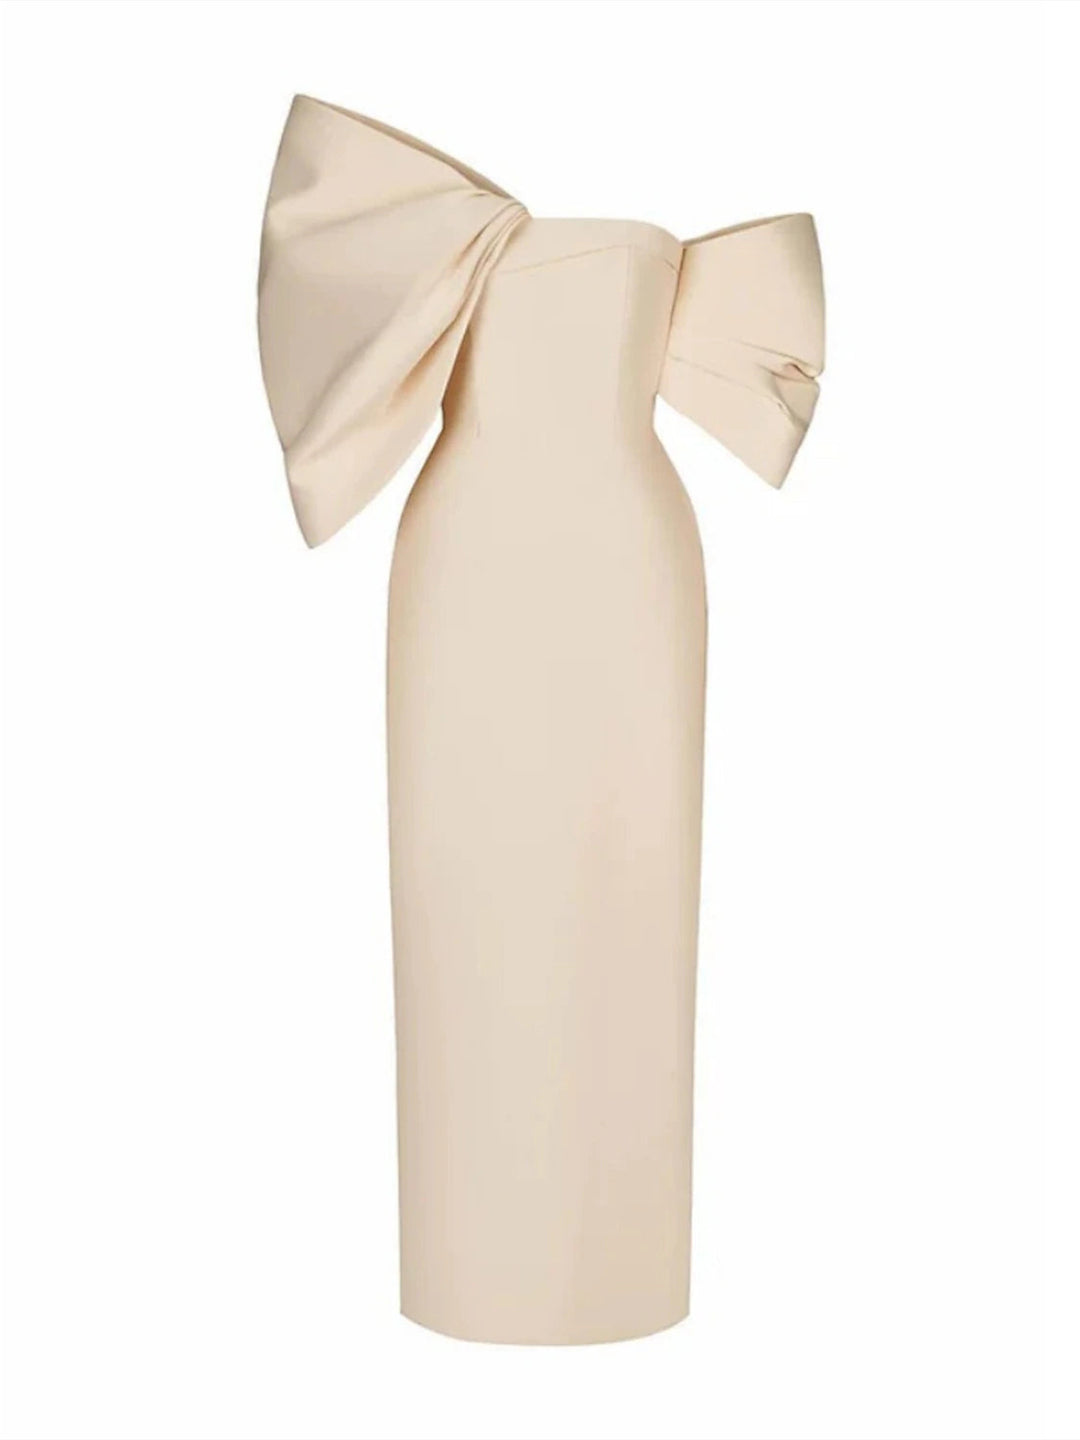 Sheath/Column Half Sleeve Off-the-Shoulder Evening Dresses With Bow(s)